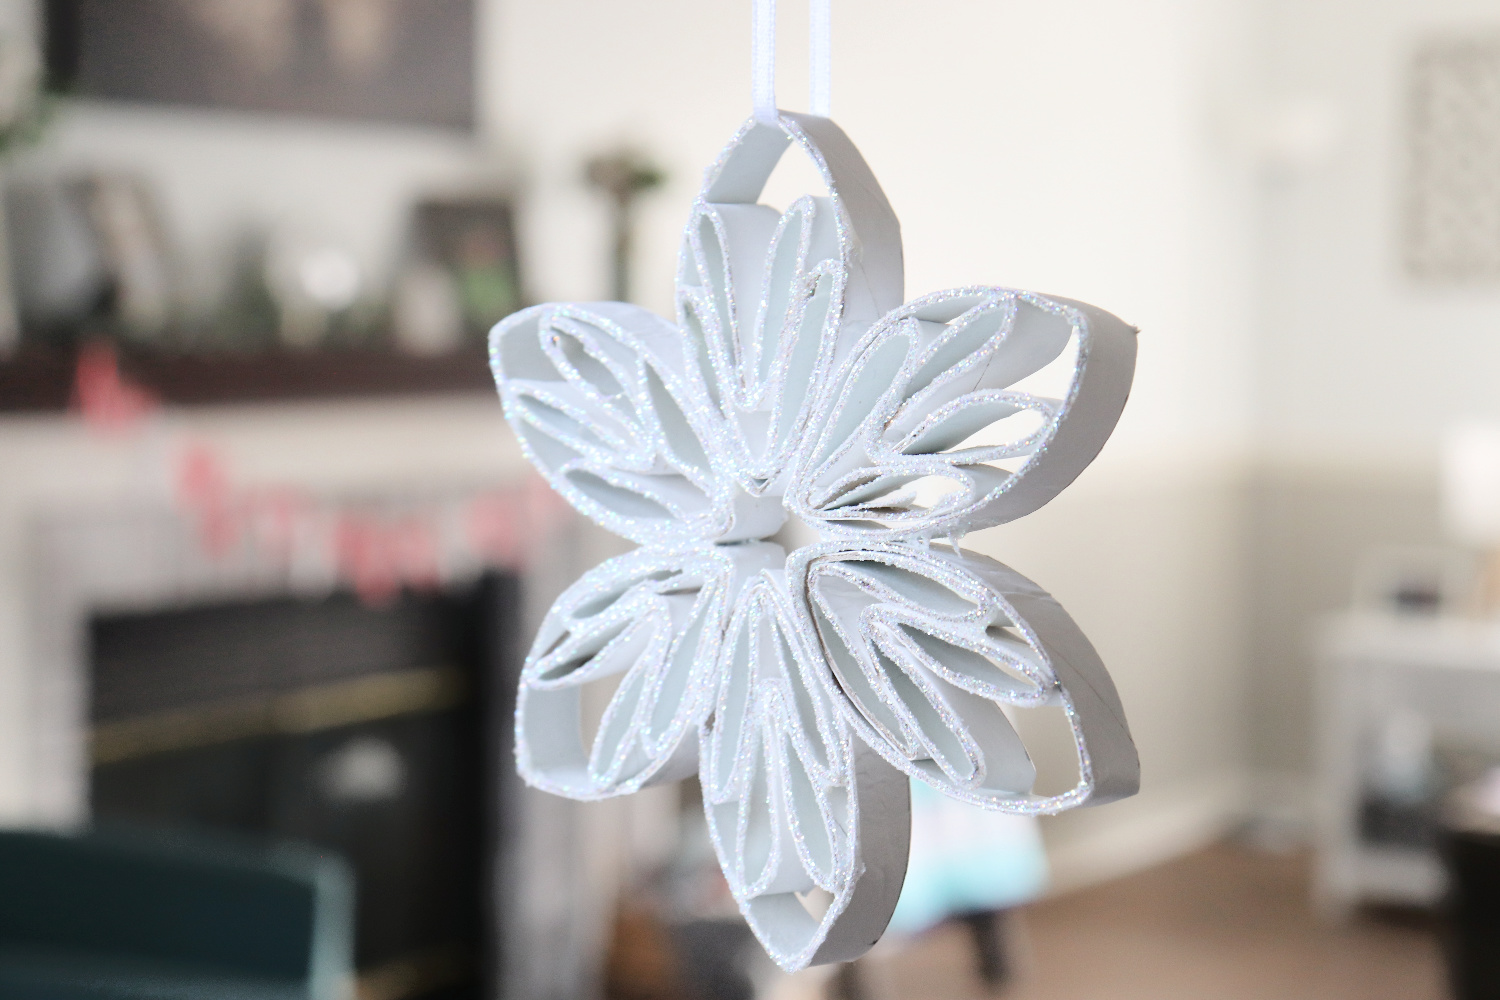 Learn to make a Paper Roll Snowflake with the help of Tombow adhesives in this tutorial by Amy Latta.